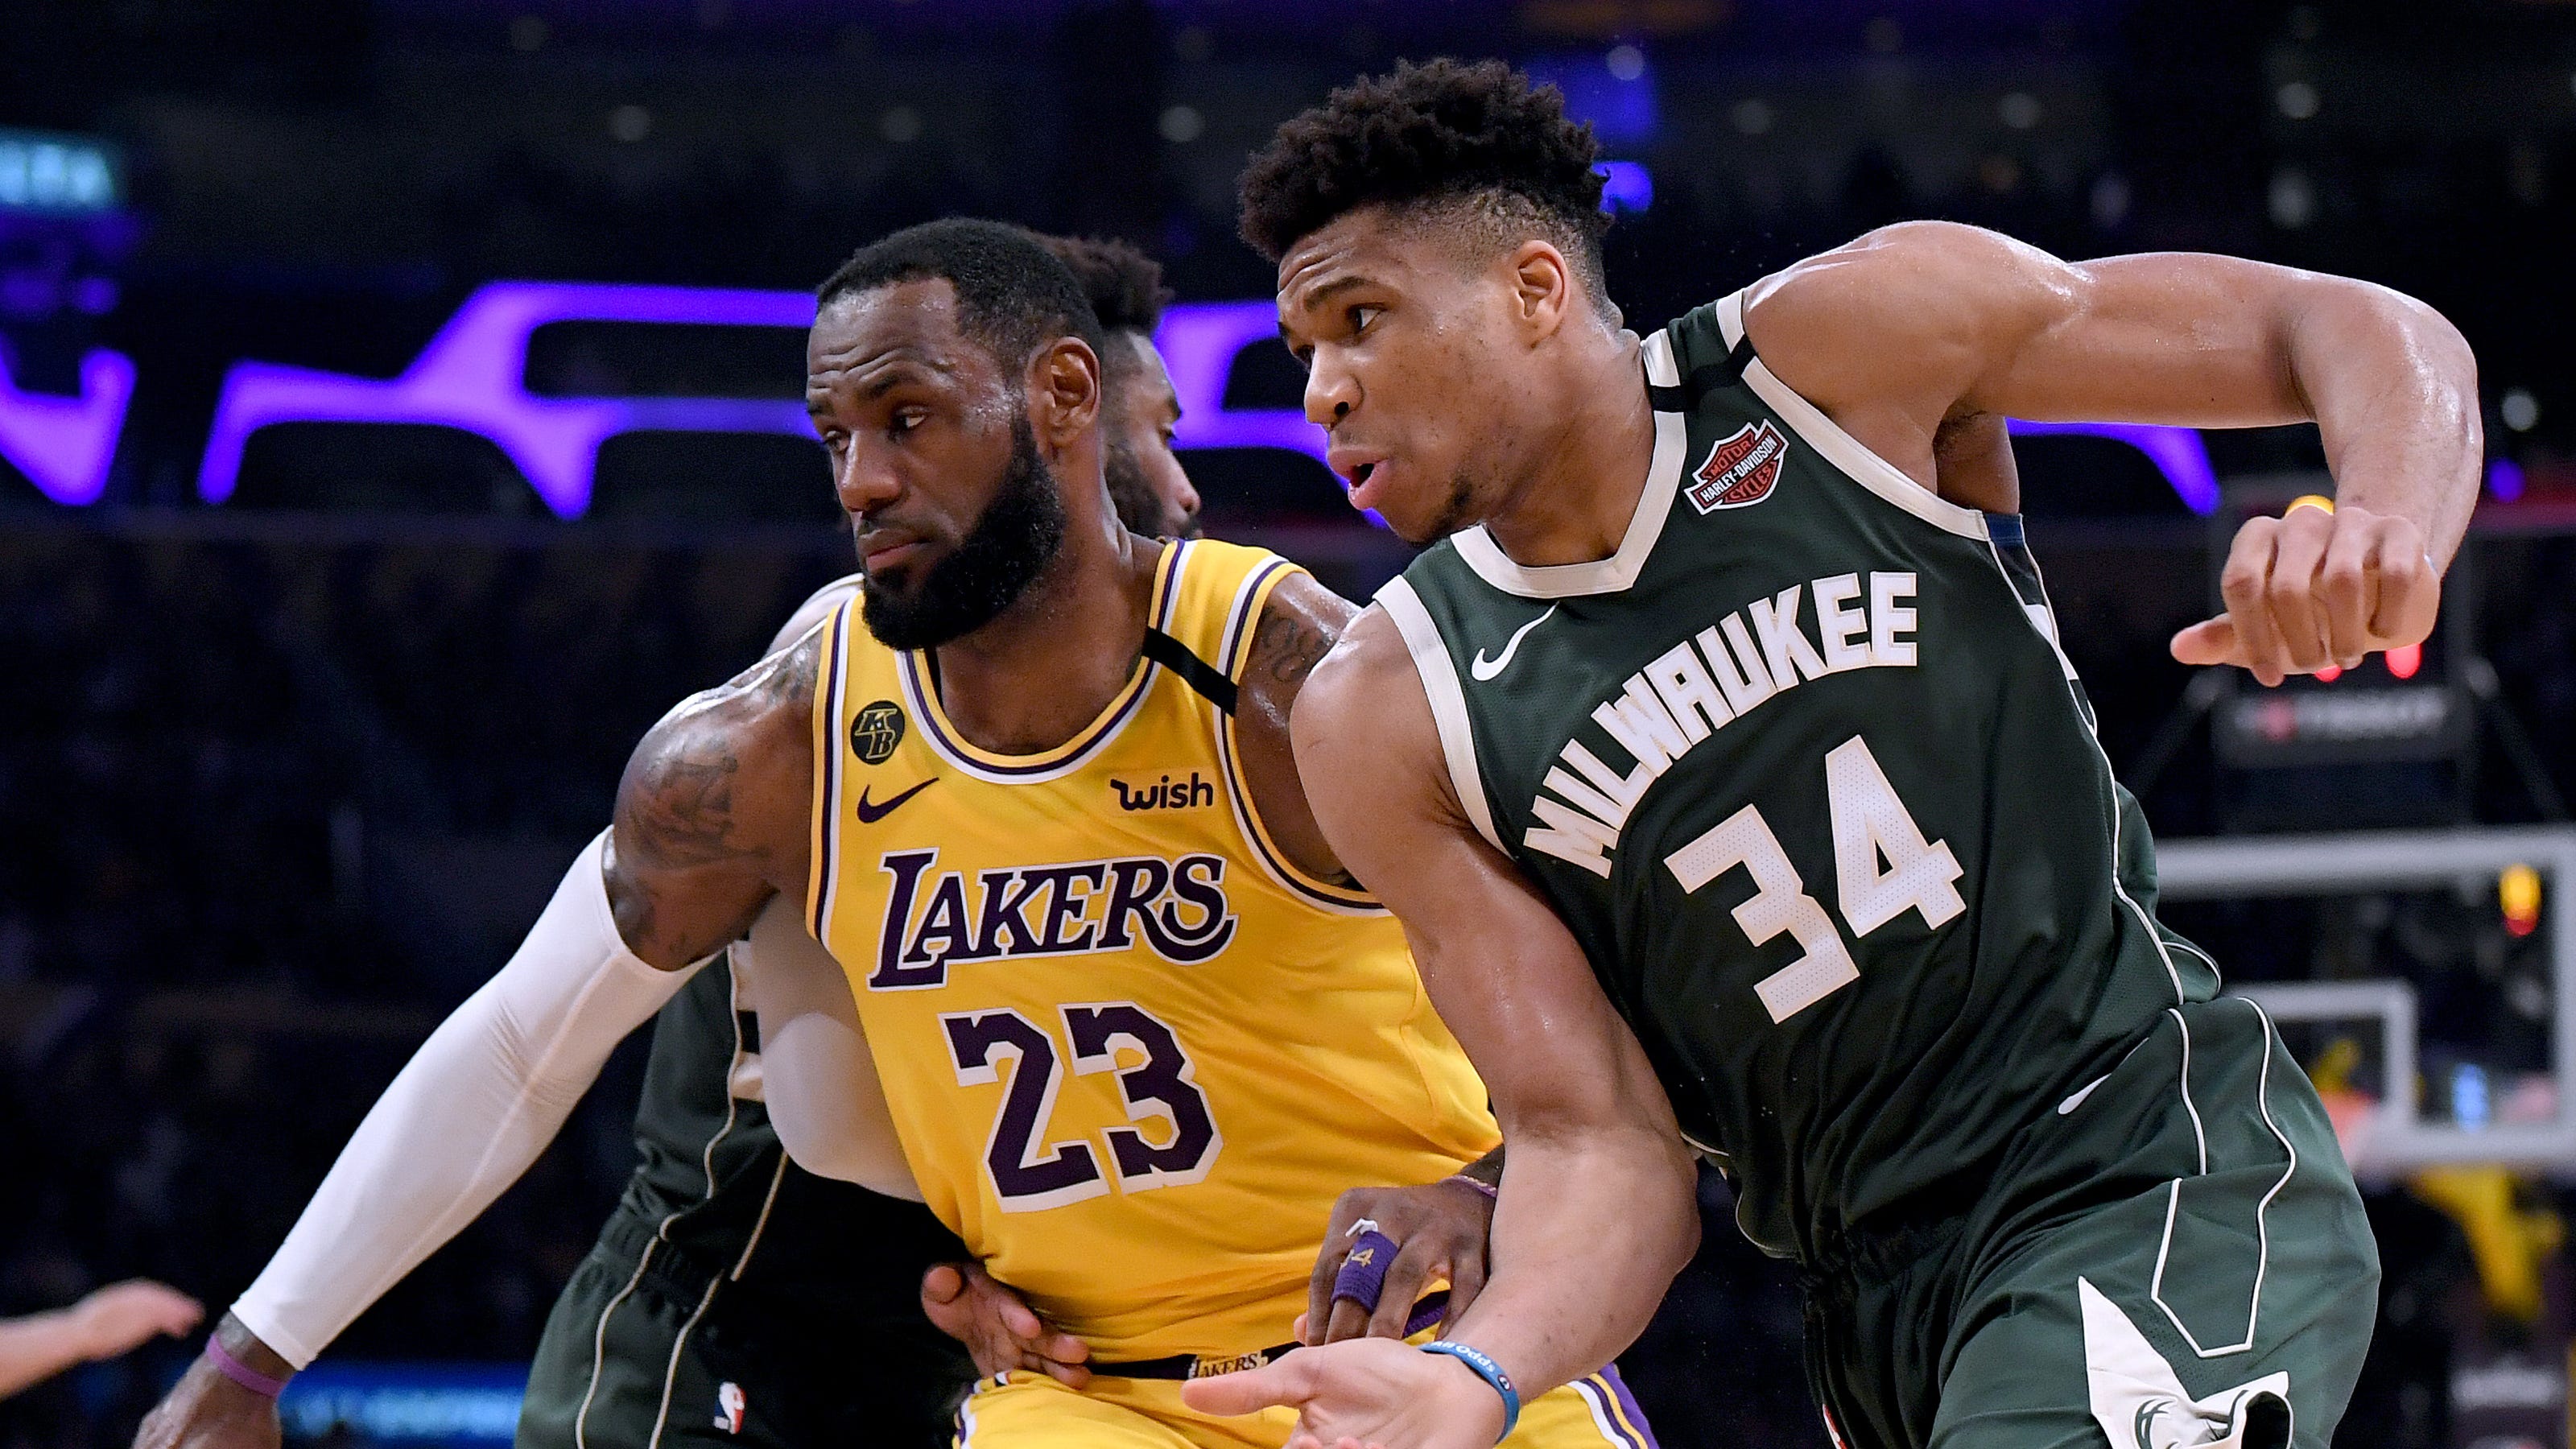 Lakers 113, Bucks 106: LeBron James leads the way and red-hot Kentavious Caldwell-Pope makes the difference